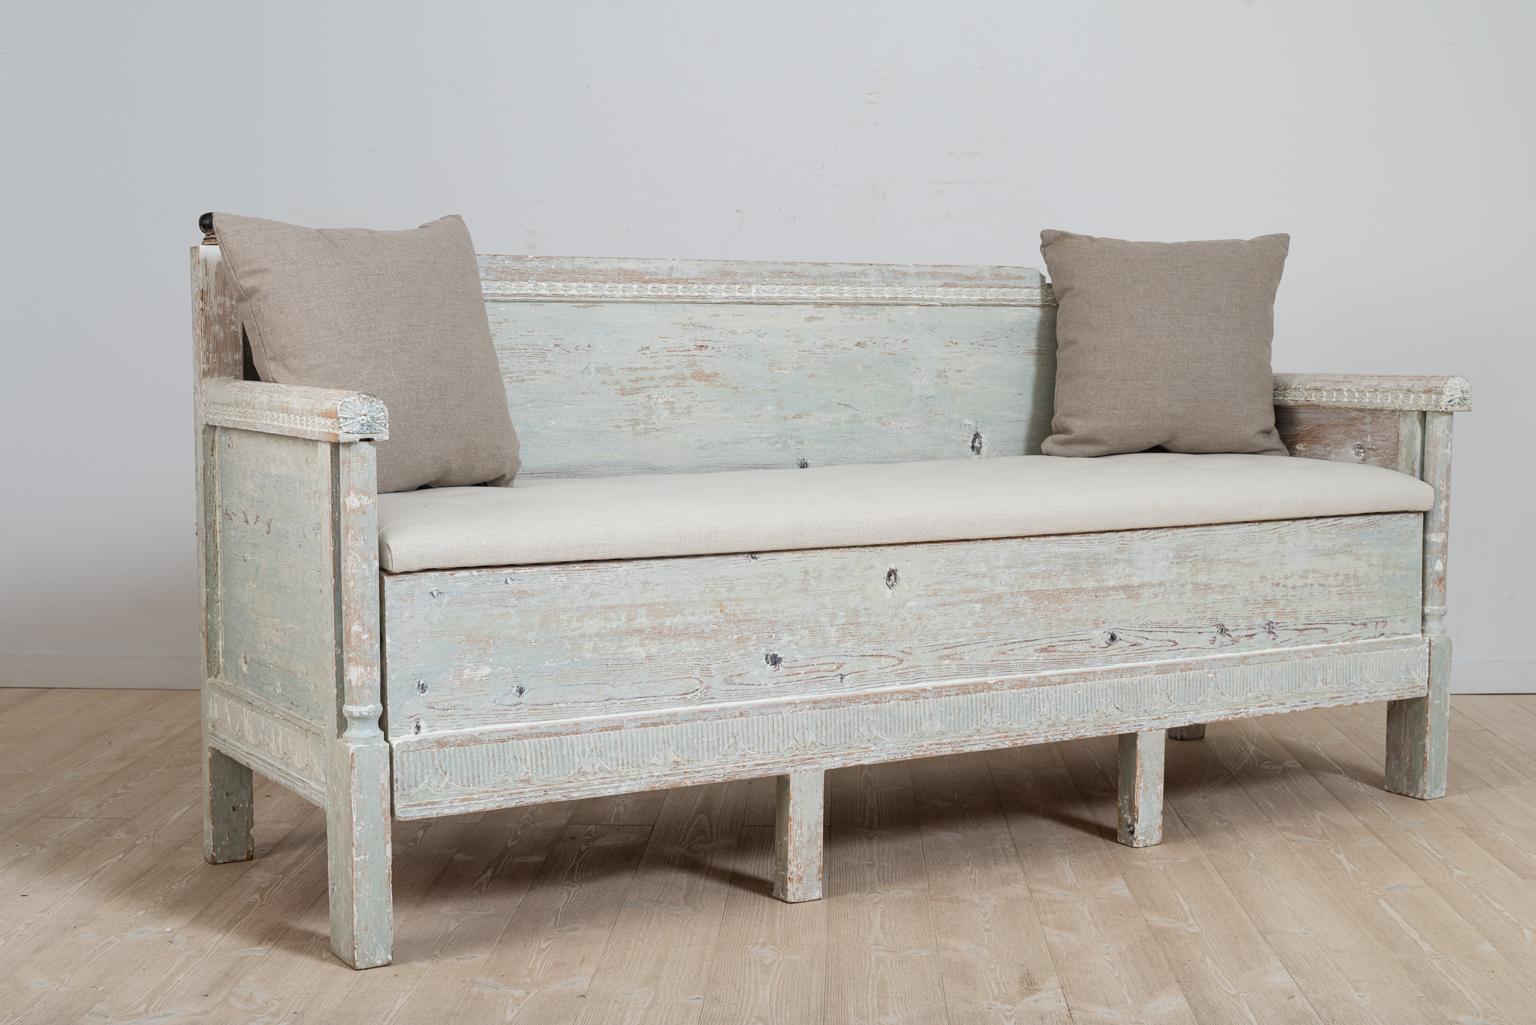 Gustavian Provincial sofa from northern Sweden. The sofa is hand scraped to the original light blue / green paint. Decorated with carved wooden decor over the back and lower section. 

The space under the seat is favourably used as extra storage